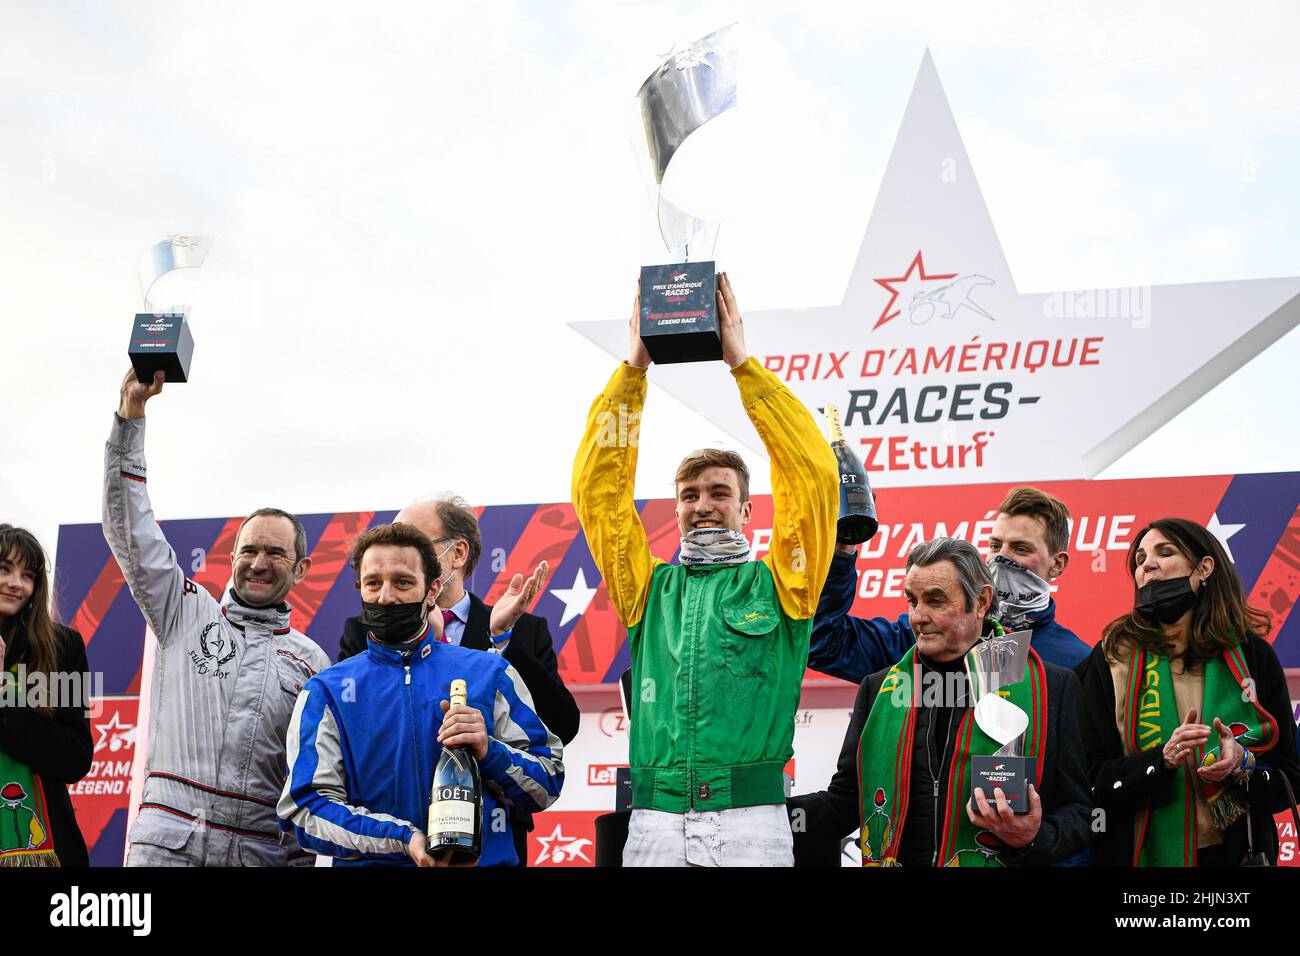 From left, Jockey/driver Jean-Michel Bazire, Yoann Lebourgeois (2nd),  Nicolas Bazire (1st) winning with "Davidson du Pont" and Theo Duvaldestin  (3rd) during the podium ceremony of the Grand Prix d'Amerique Legend Horse  Race